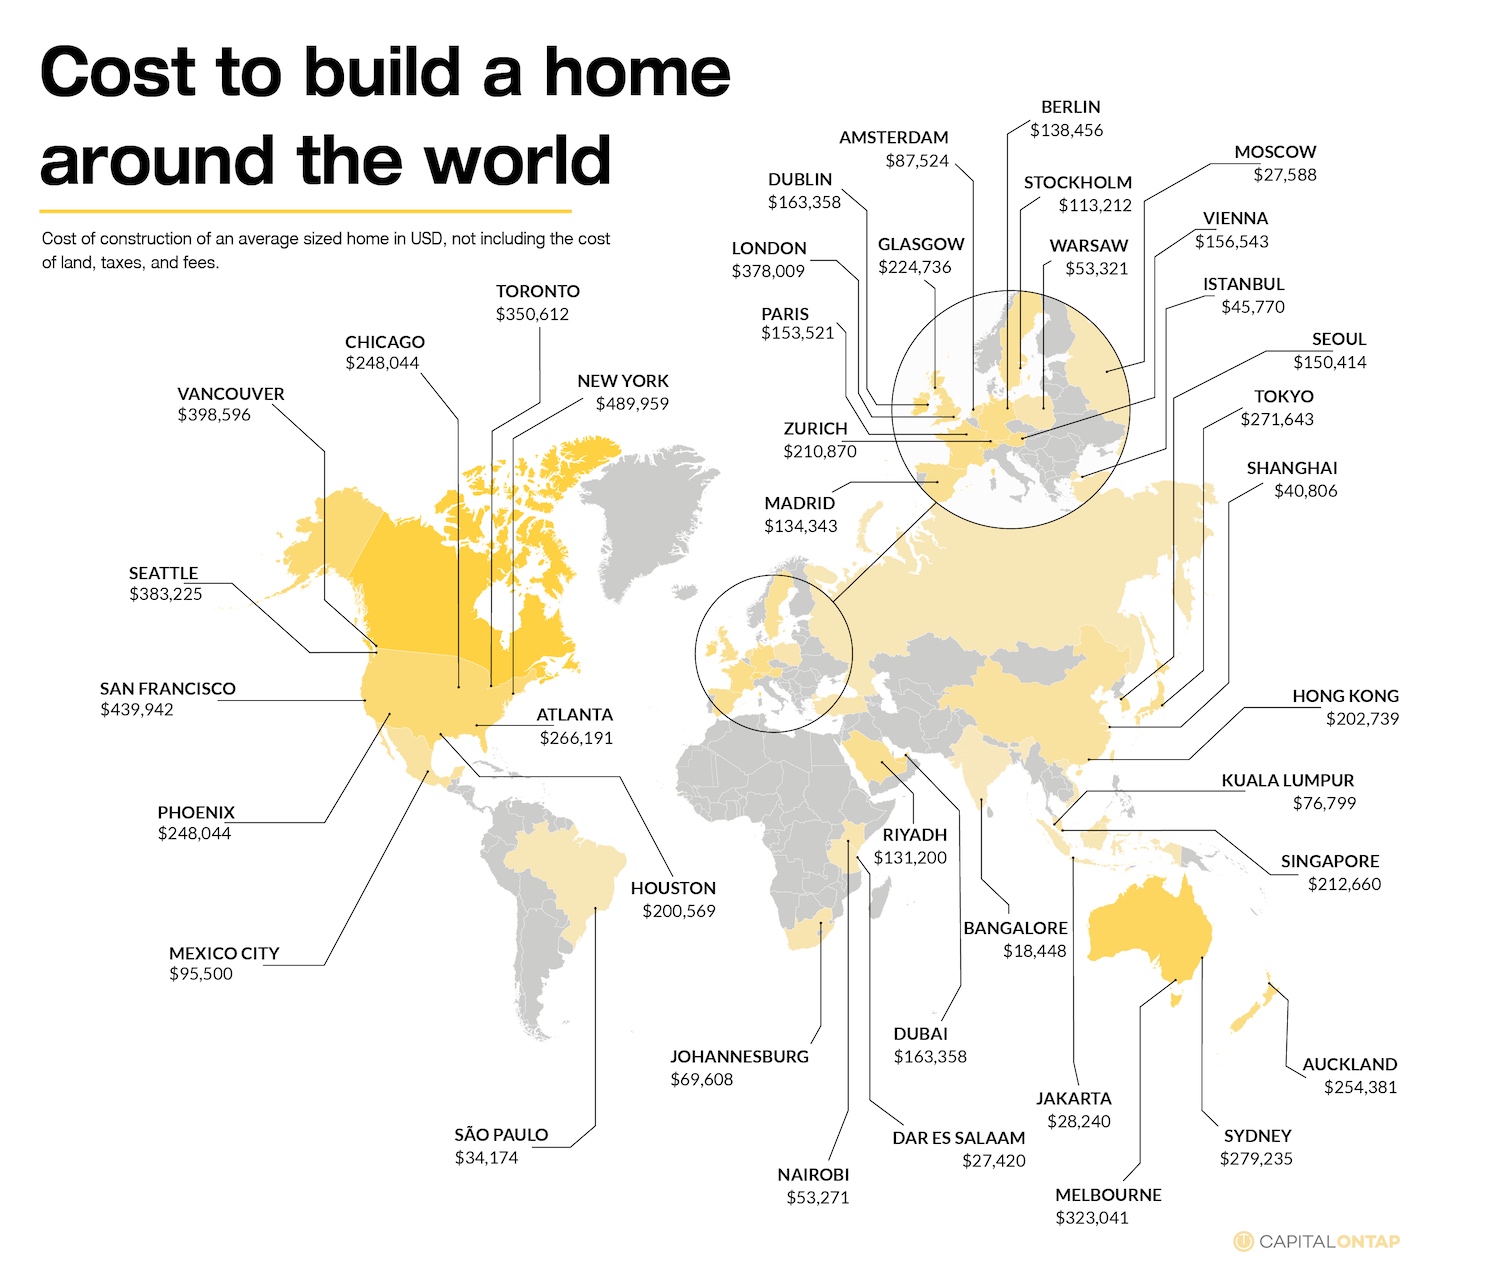 vancouver most expensive cities in the world to build a home